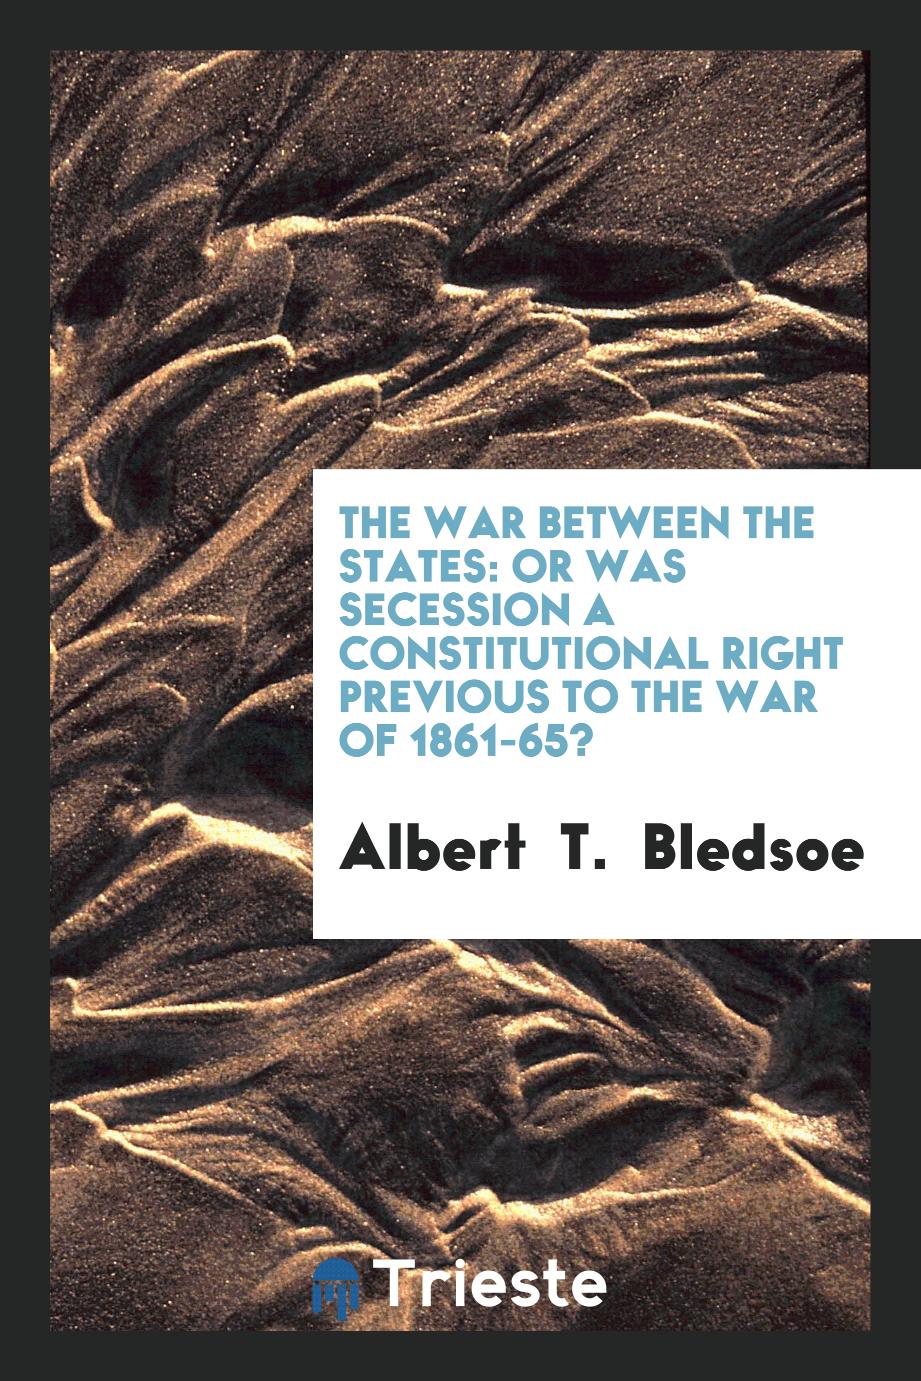 The war between the states: or was secession a constitutional right previous to the war of 1861-65?